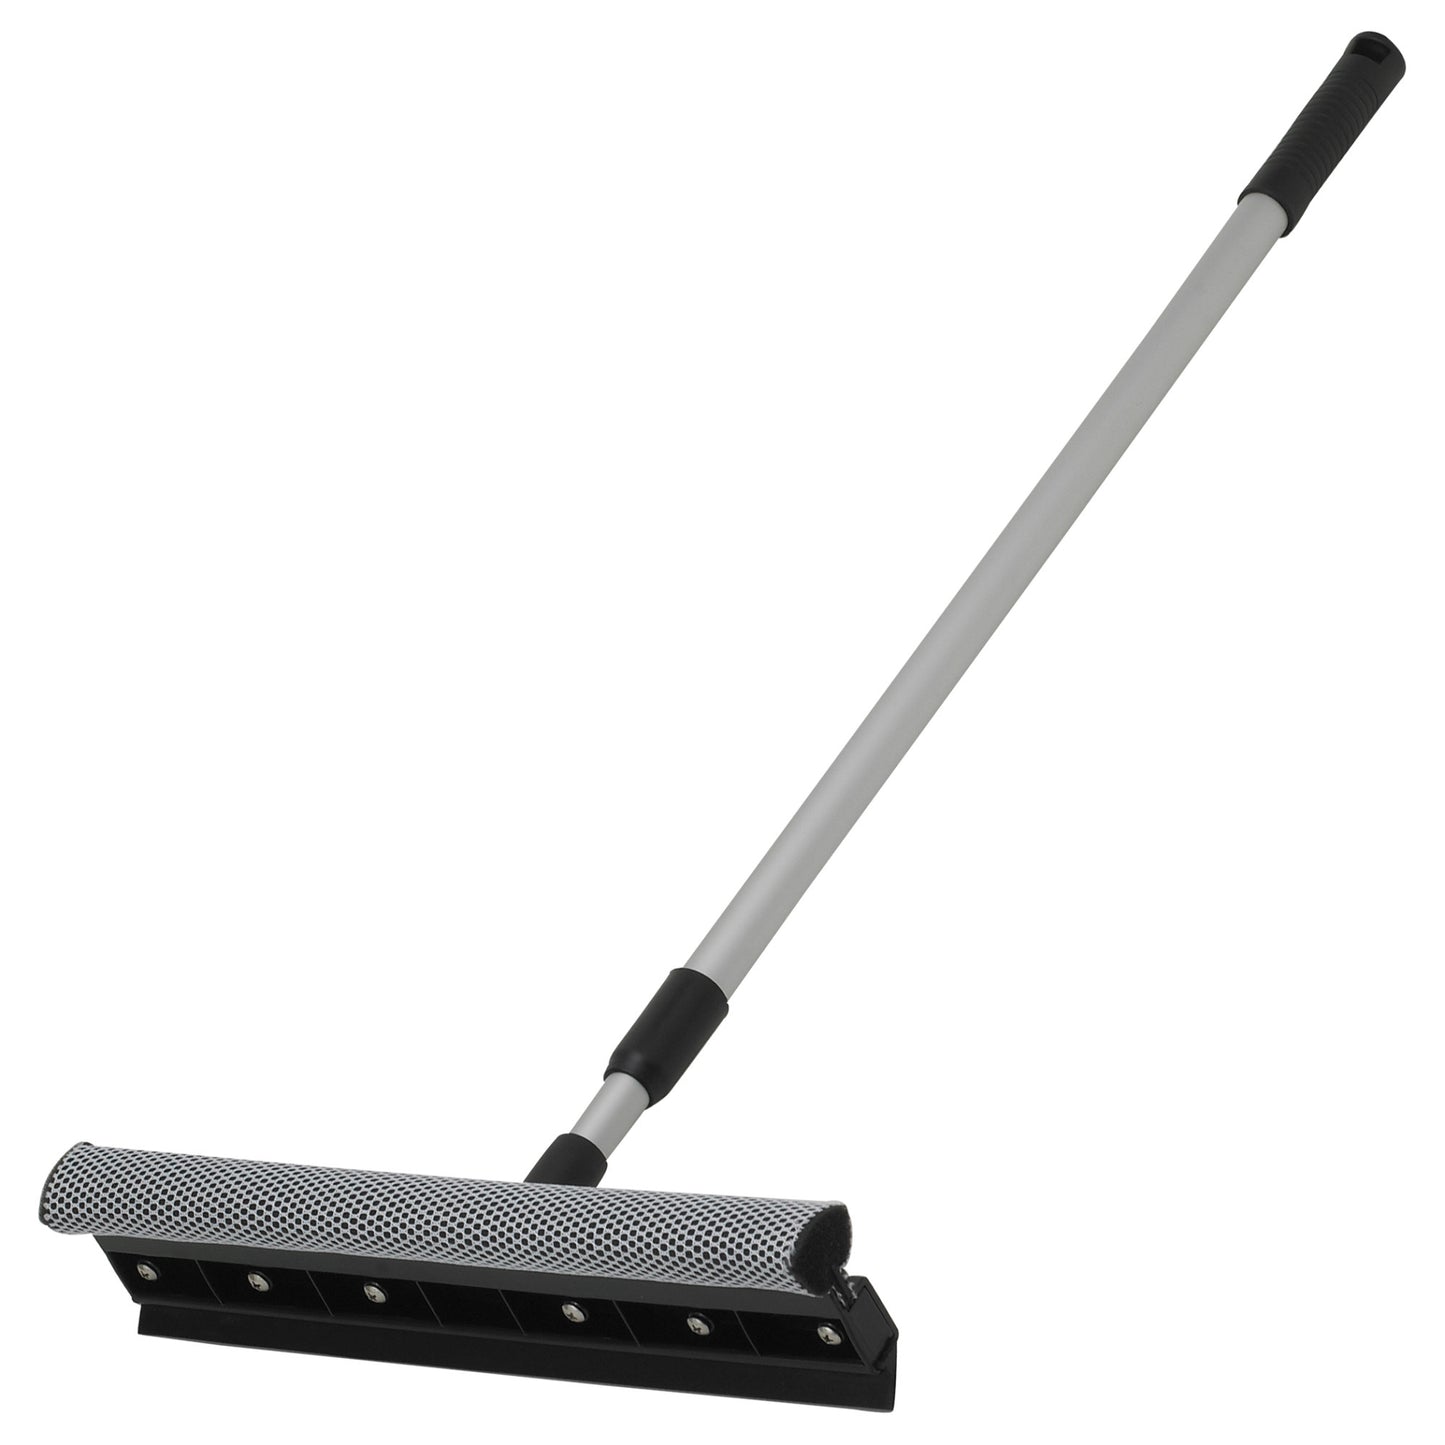 WS-15 - 15" Window Squeegee with Telescopic Handle